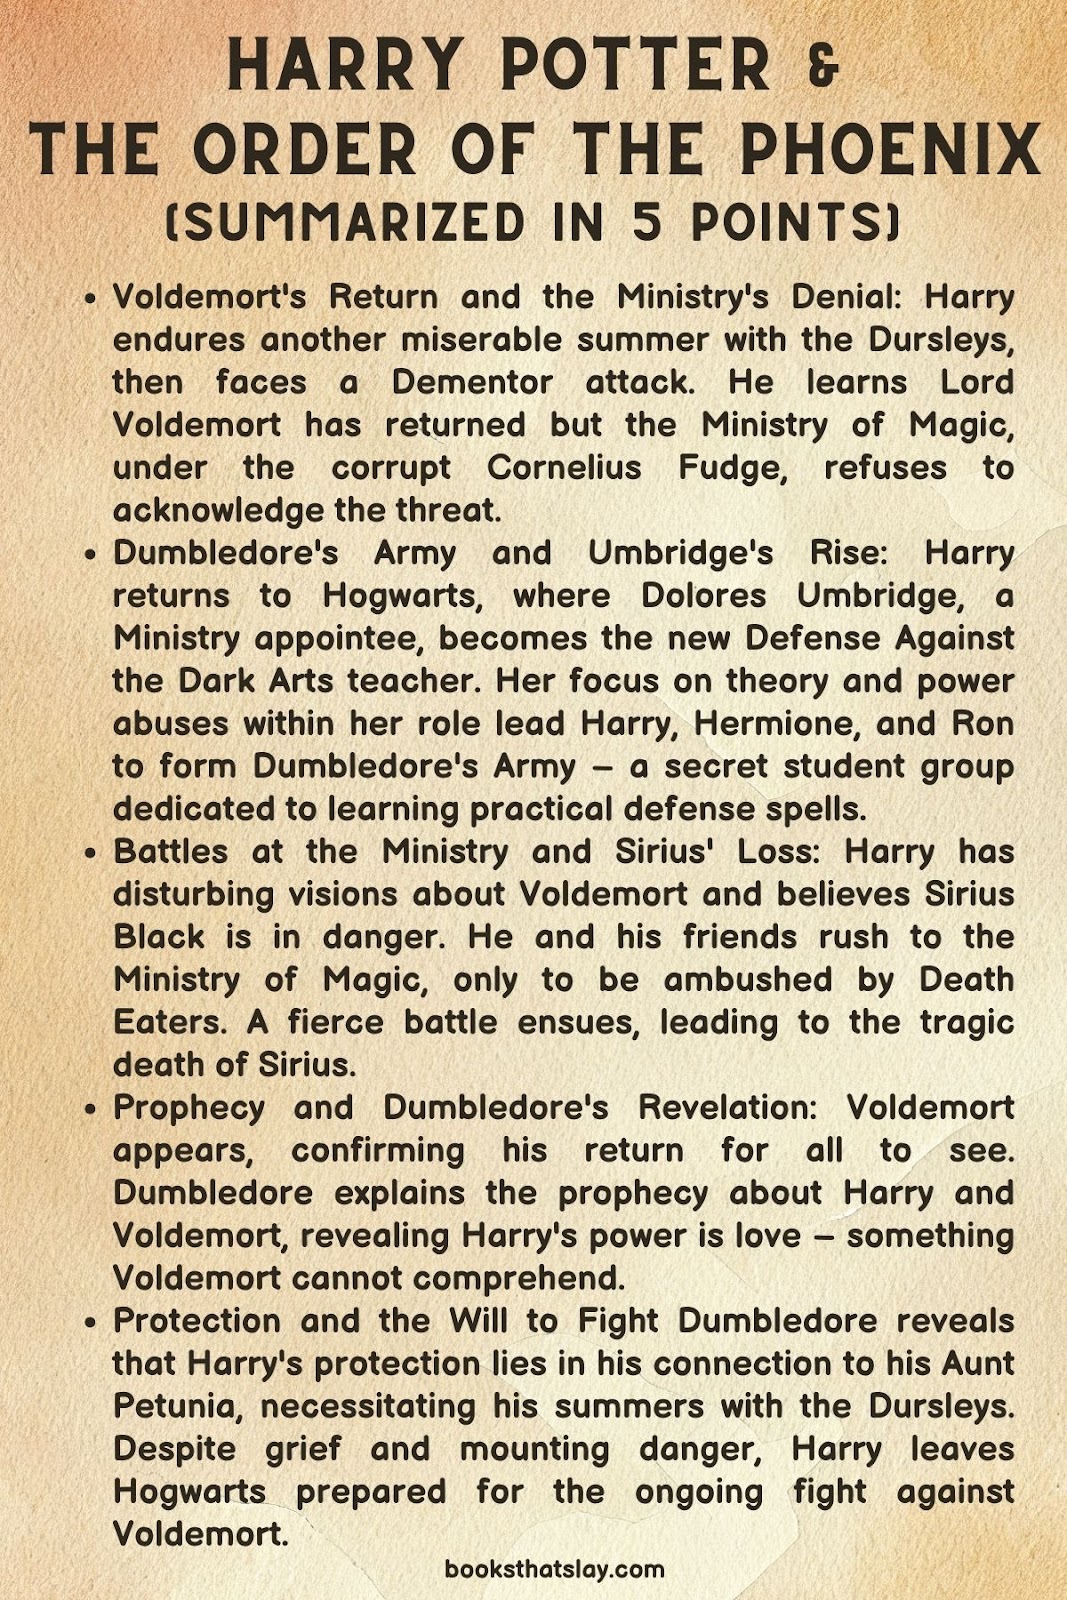 Harry Potter and the Order of the Phoenix Summary, Characters and Themes